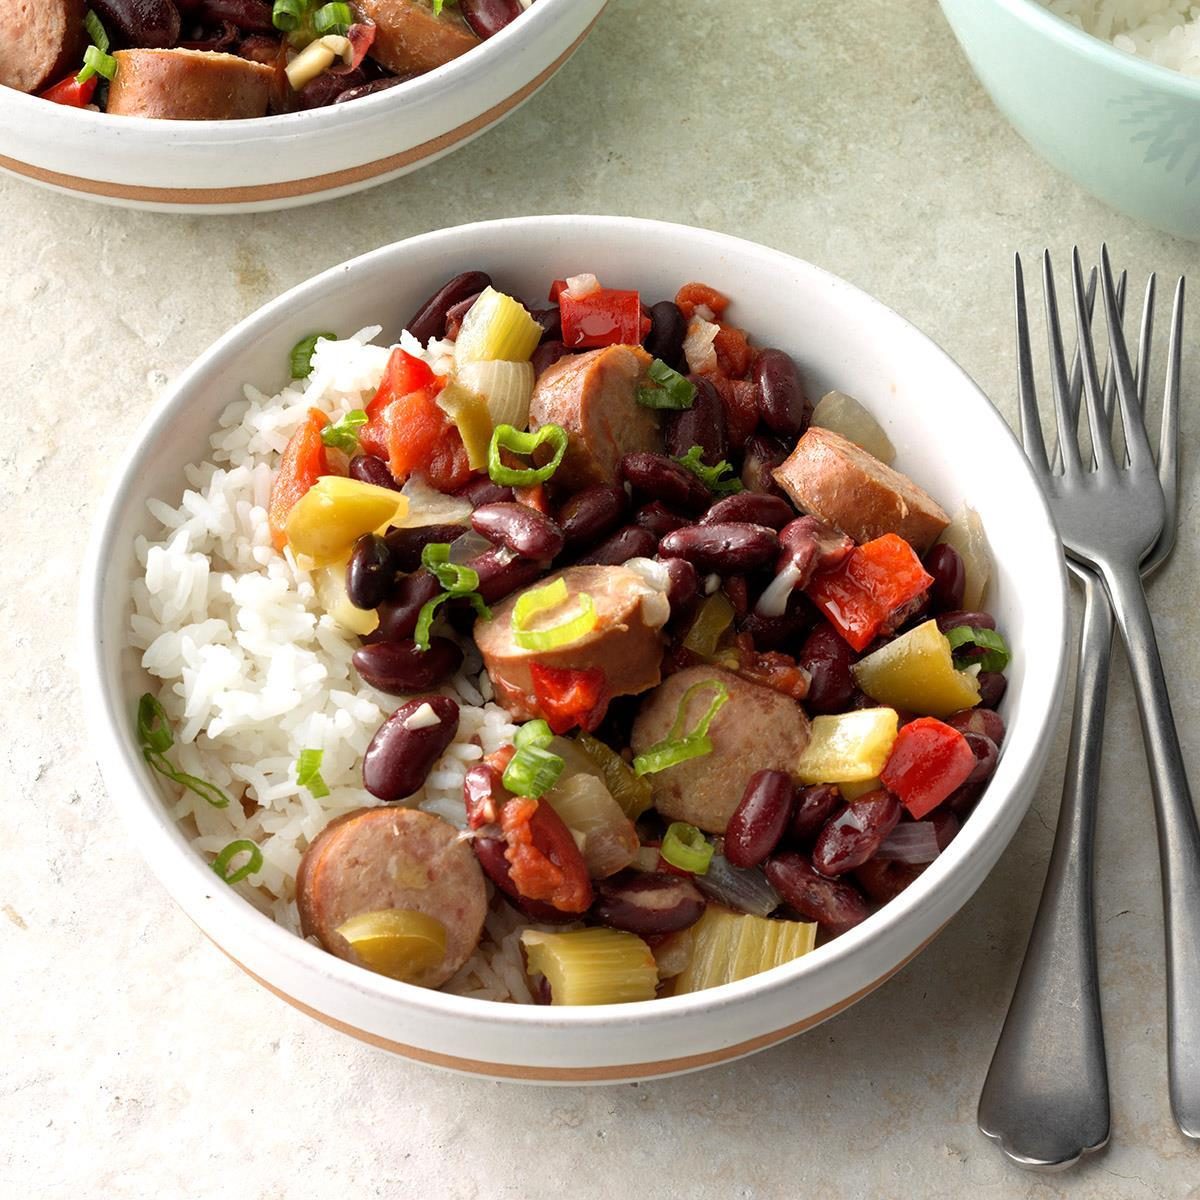 Louisiana Red Beans and Rice Recipe: How to Make It